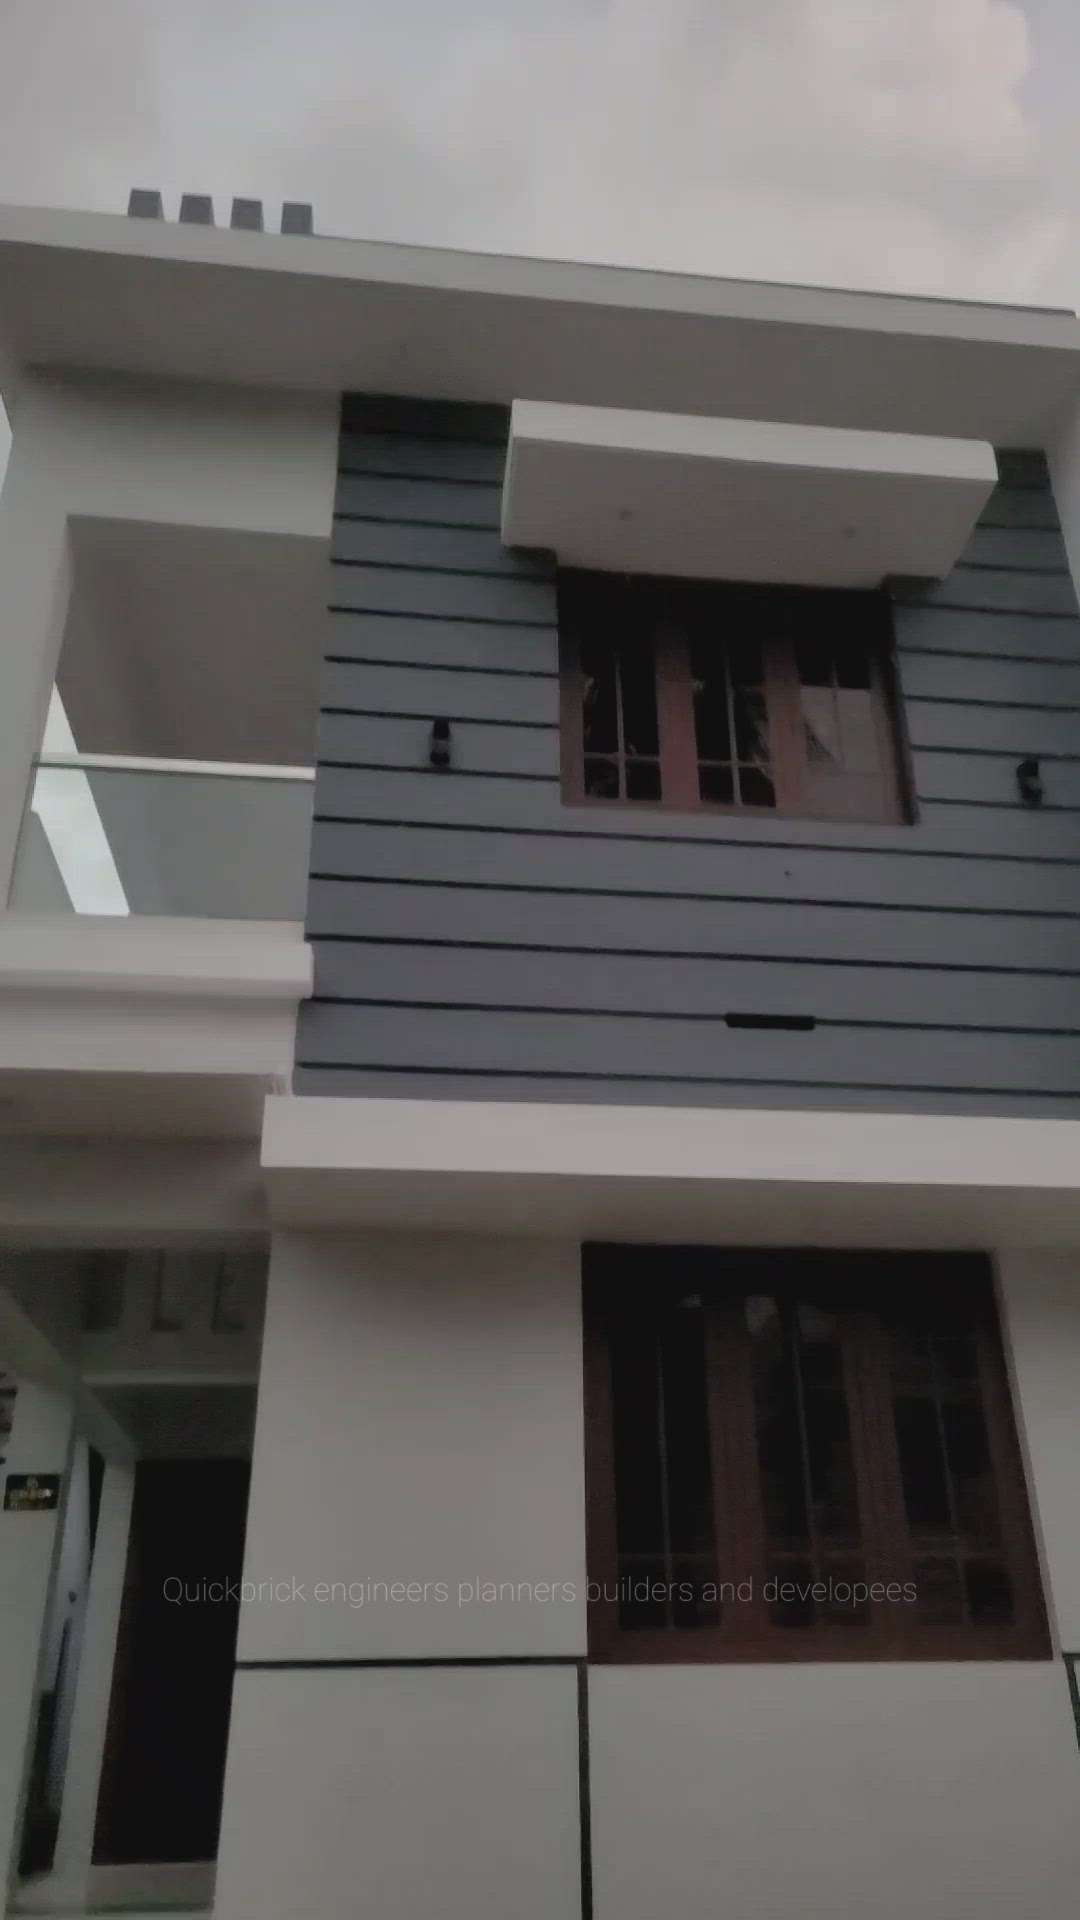 1500 sqfeet 3BHK Completed Project  at Tattamangalam...

THANK YOU.... ASHIK & ARIF FAMLY
....

May your new home be filled with love and good health...
.
.
.
Quickbrick engineers planners builders and developers
Contact 8075048107
qbbuilders11@gmail.com
.
.
.
.
.
.
.
.

#quickbrick #qbbuilders #instagood #instalike #insta #instagram #instadaily
#insta #trendingreels #trending #malayalam
#keralagodsowncountry #kerala #interiordesign
#interiordesigner#Interiordesign#Kitchen
HInstagood #instaliķe #instagay #interior #design
tdesign #designer #viral #viralvideos #viralreels
treels #reelsinstagram #trendingreels #trend #trendingnow #interiordesign #reels
treelsinstagram #instagram #reelsindia #viral
#viralreels #viralvideos #trendingnow #trendingdesign